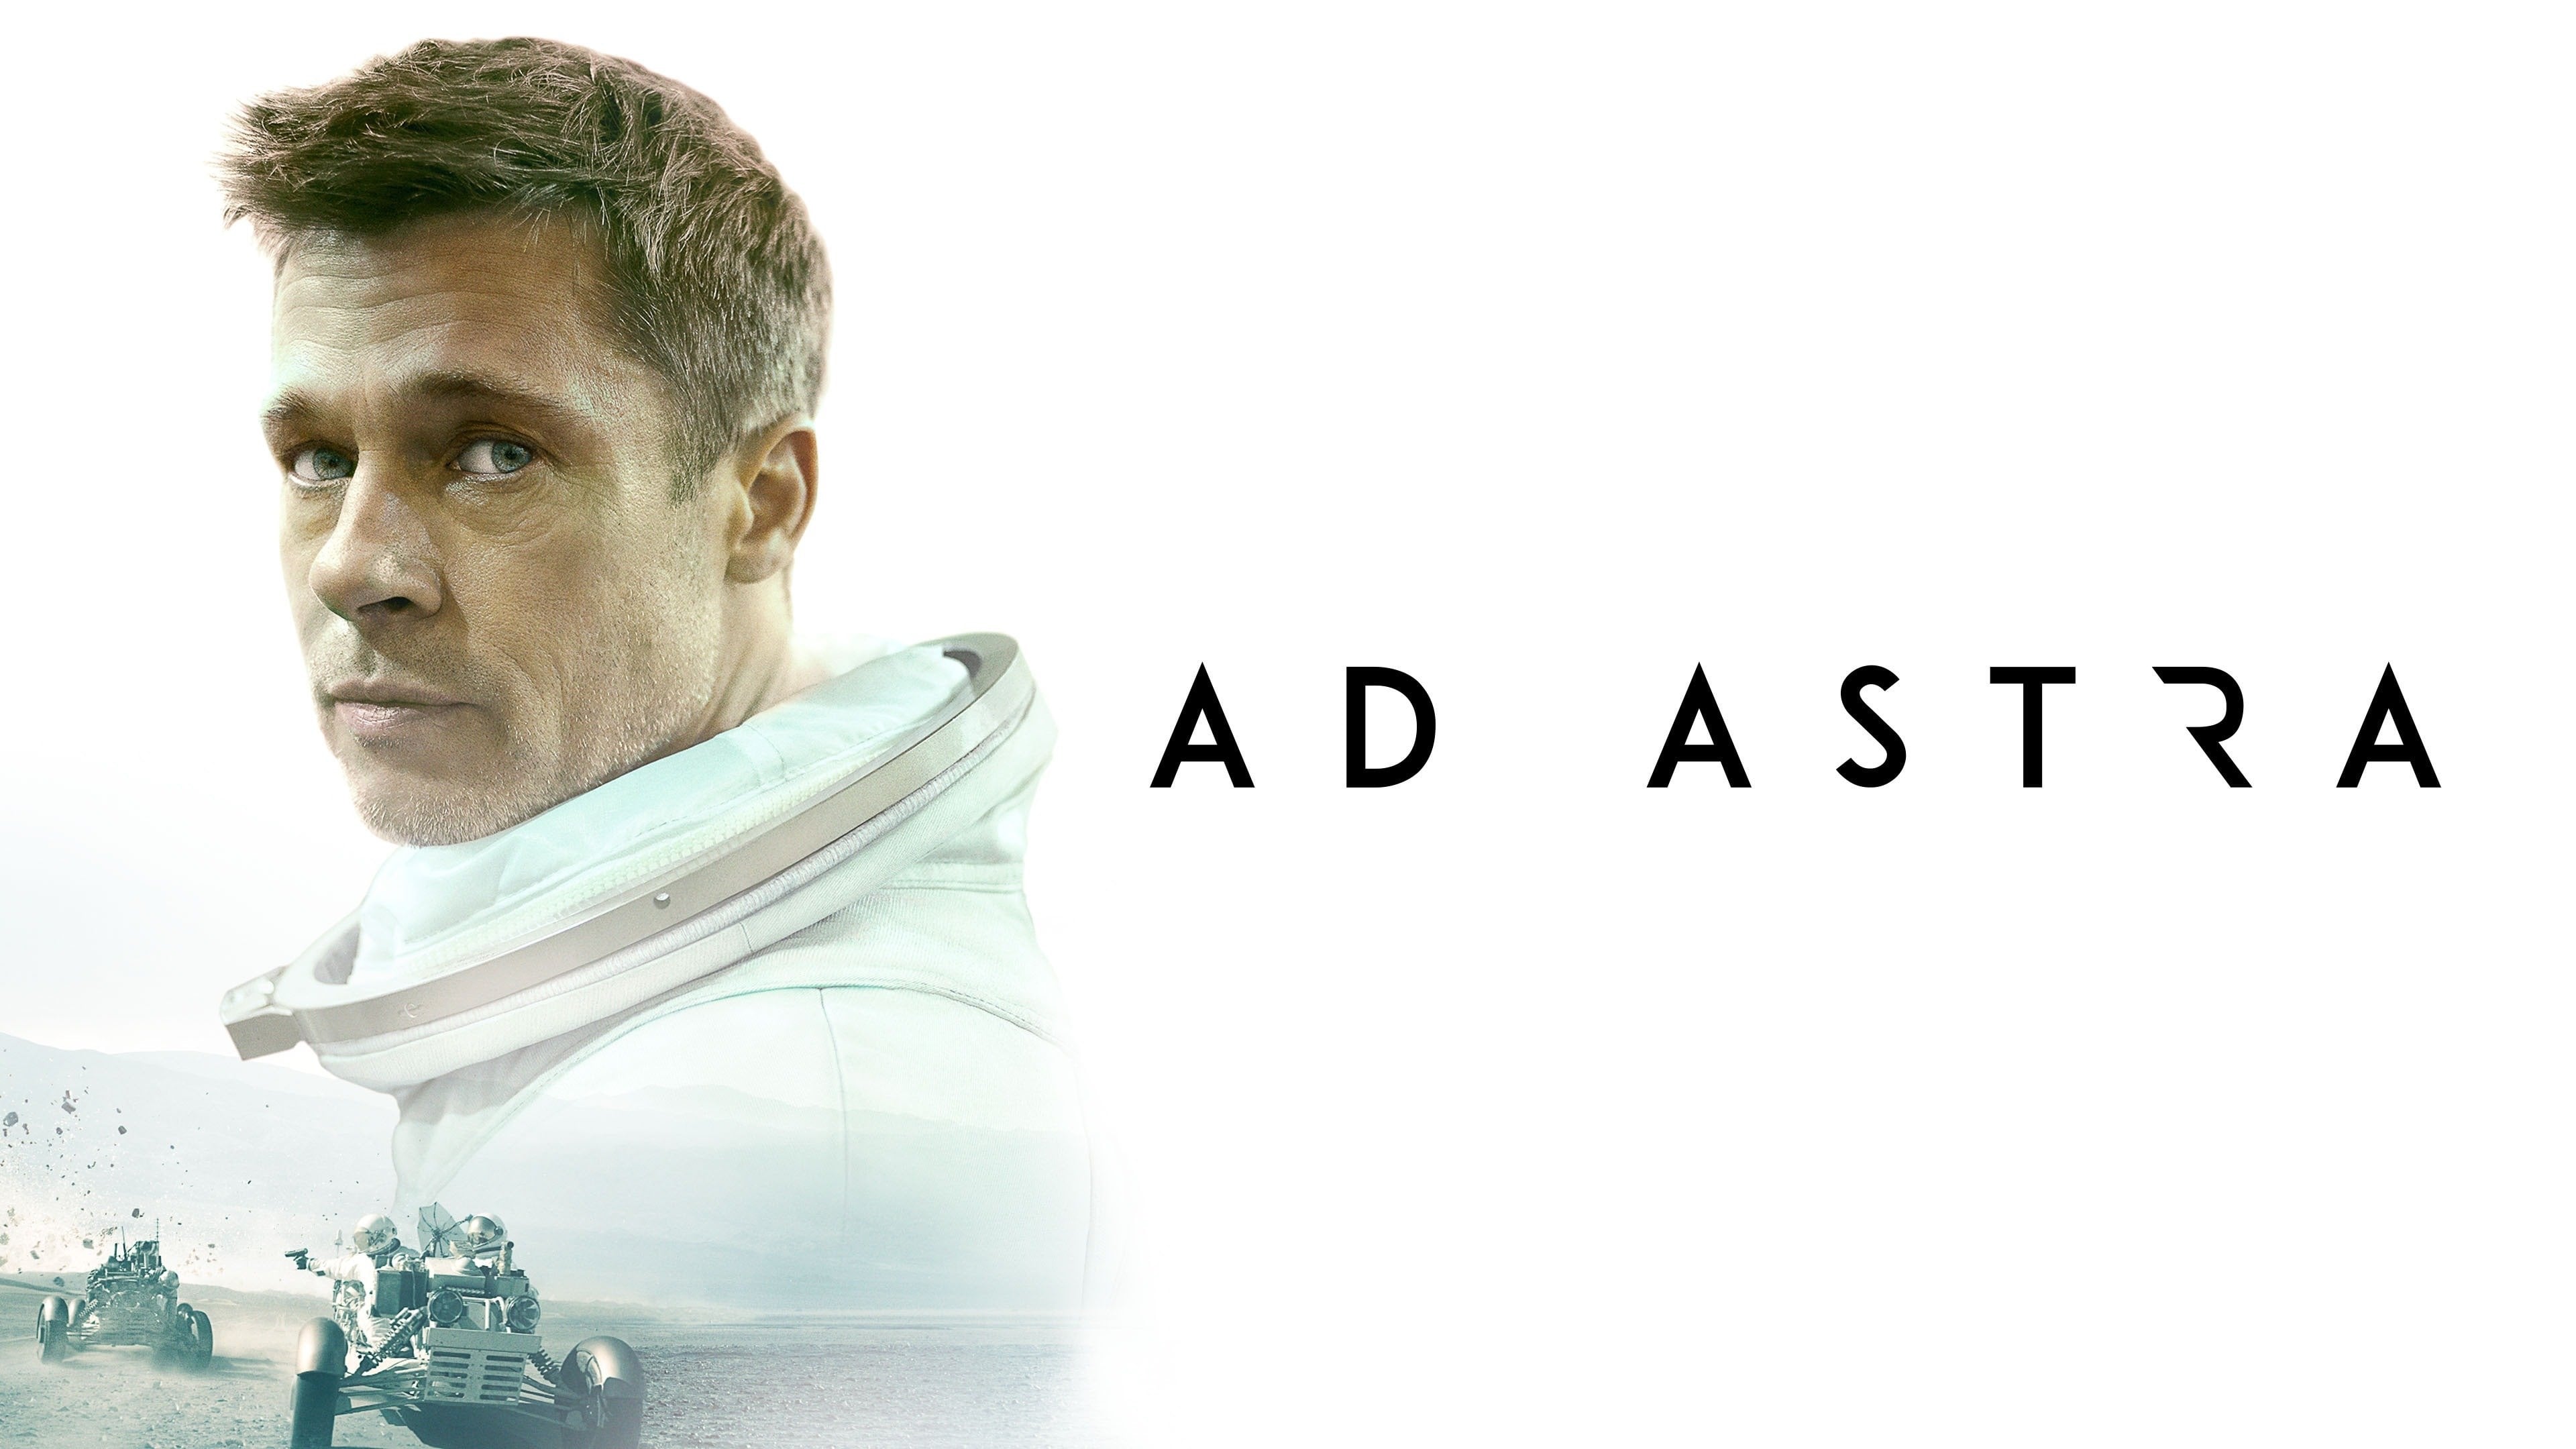 Watch Ad Astra (2019) Full Movie Online Free | Movie & TV Online HD Quality3840 x 2160